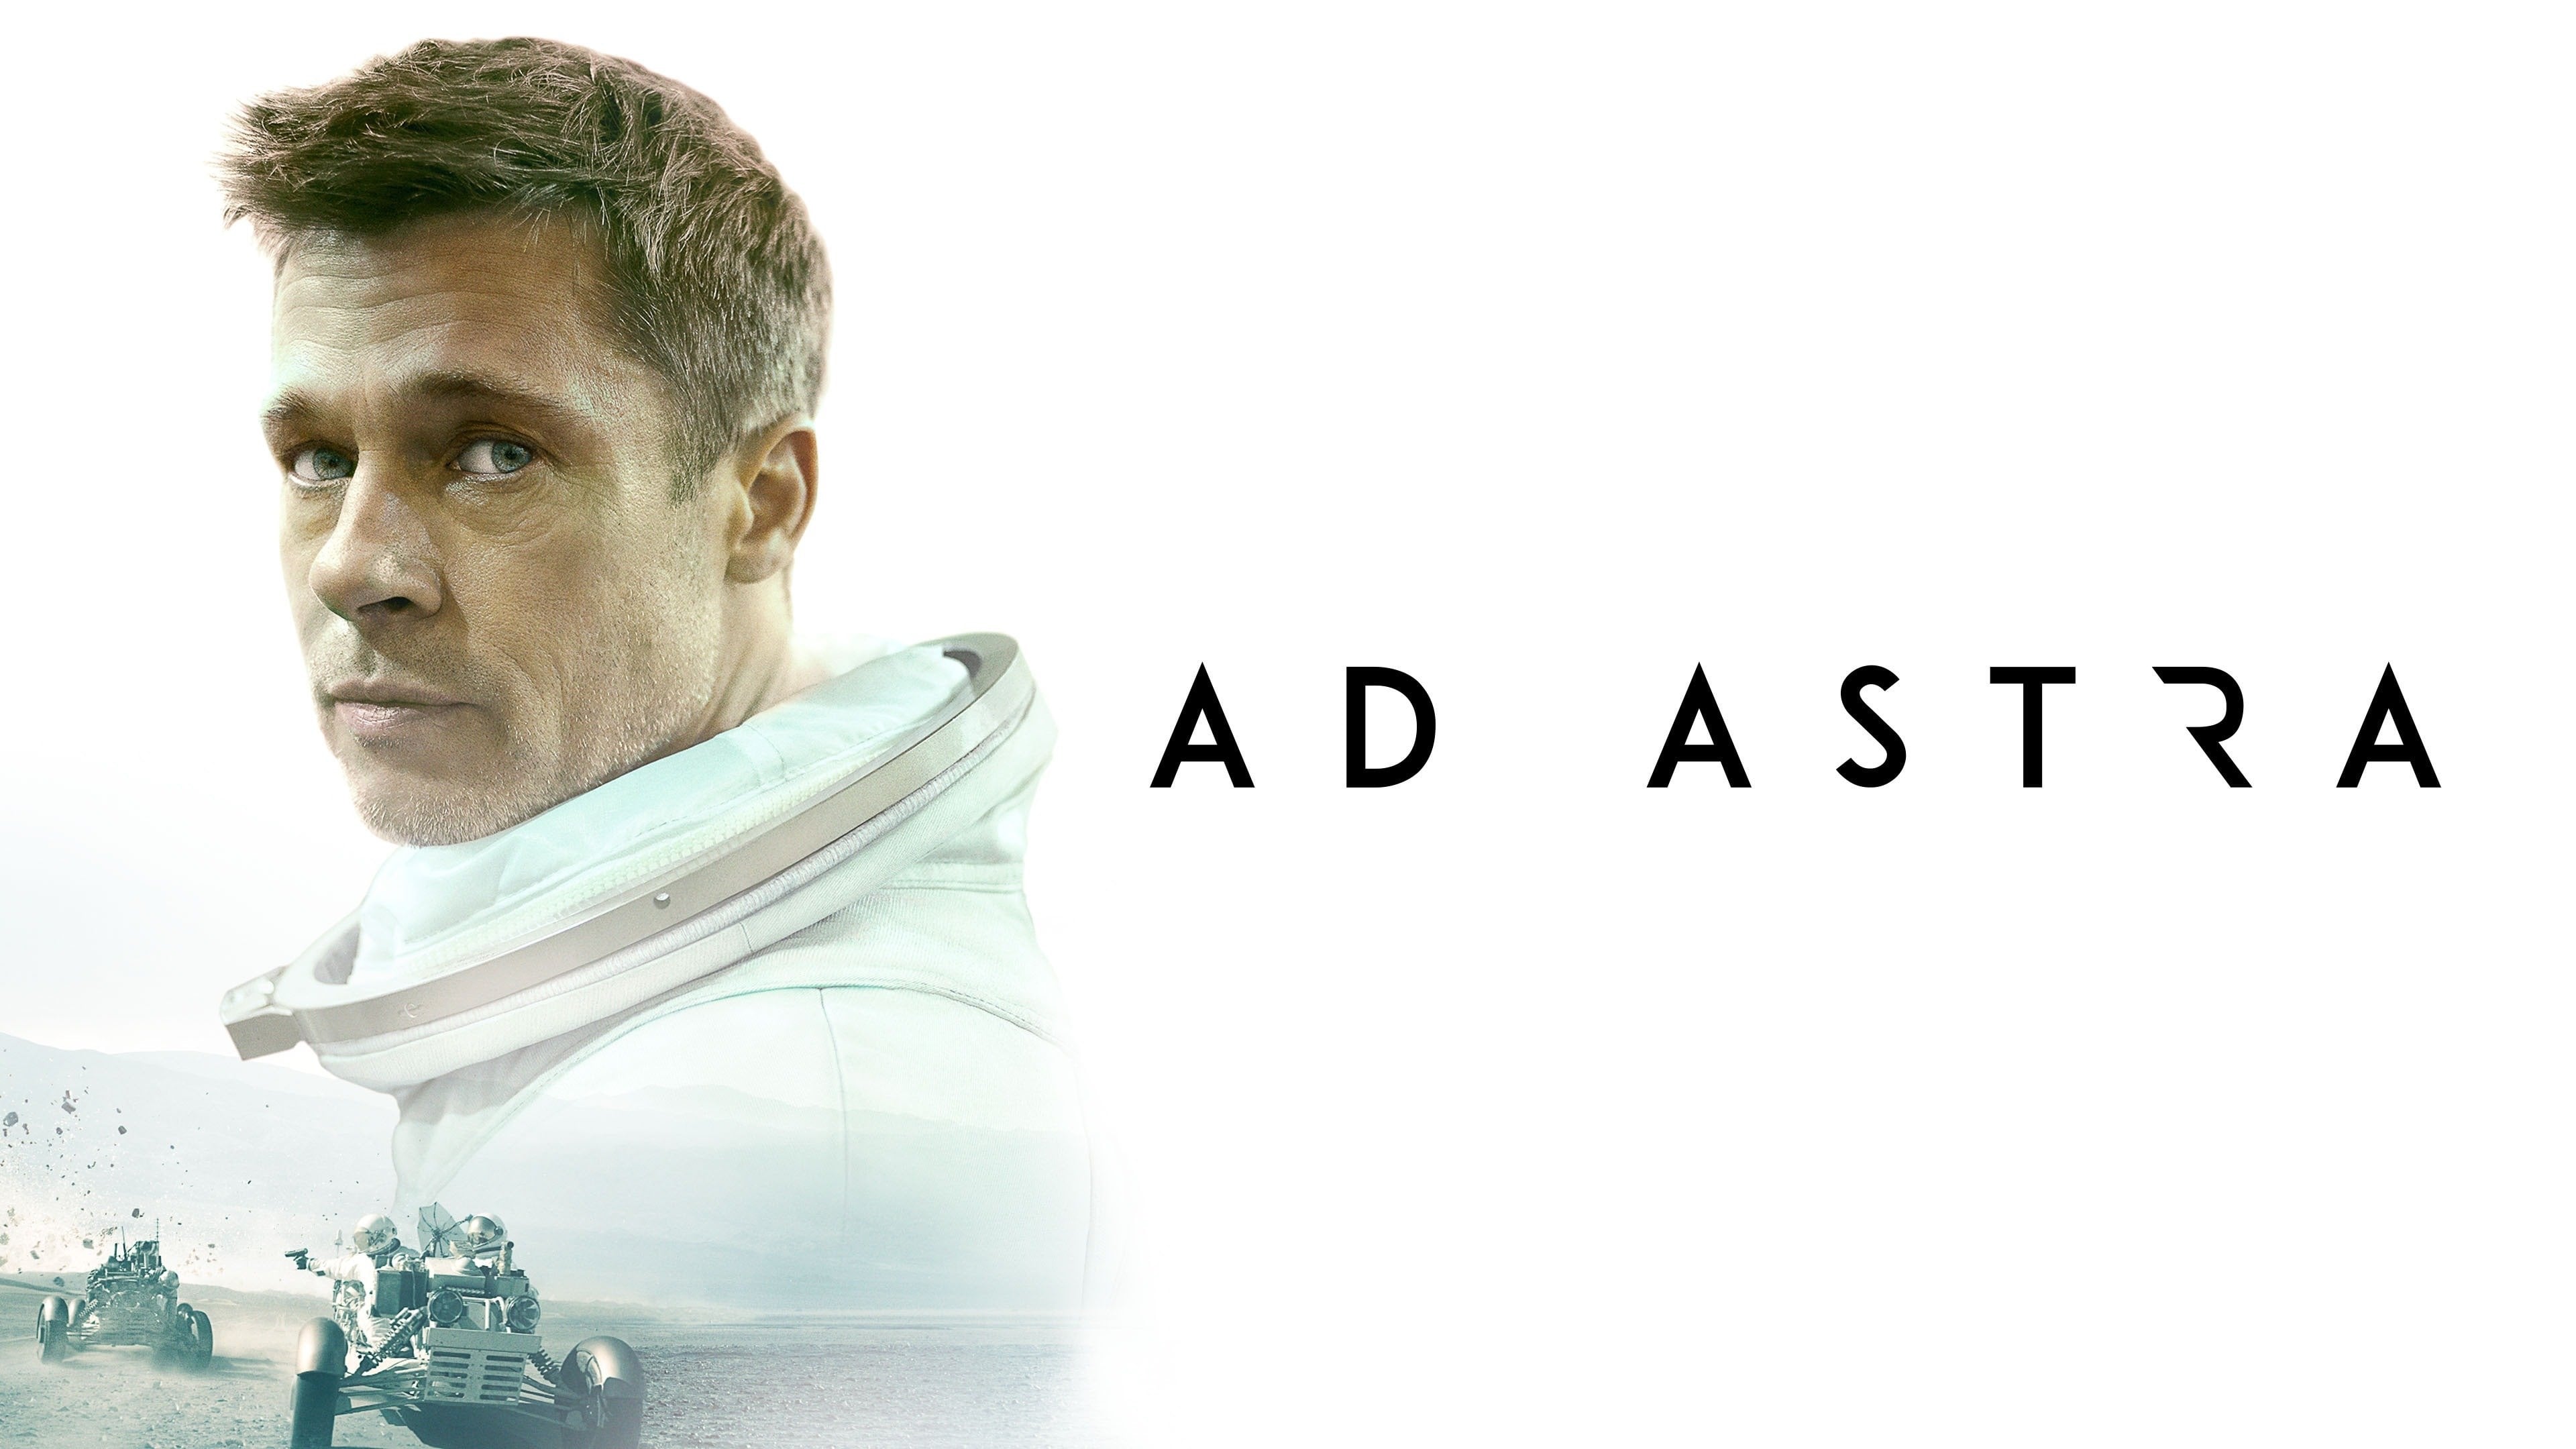 Watch Ad Astra (2019) Full Movie Online Free | Movie & TV Online HD Quality3840 x 2160